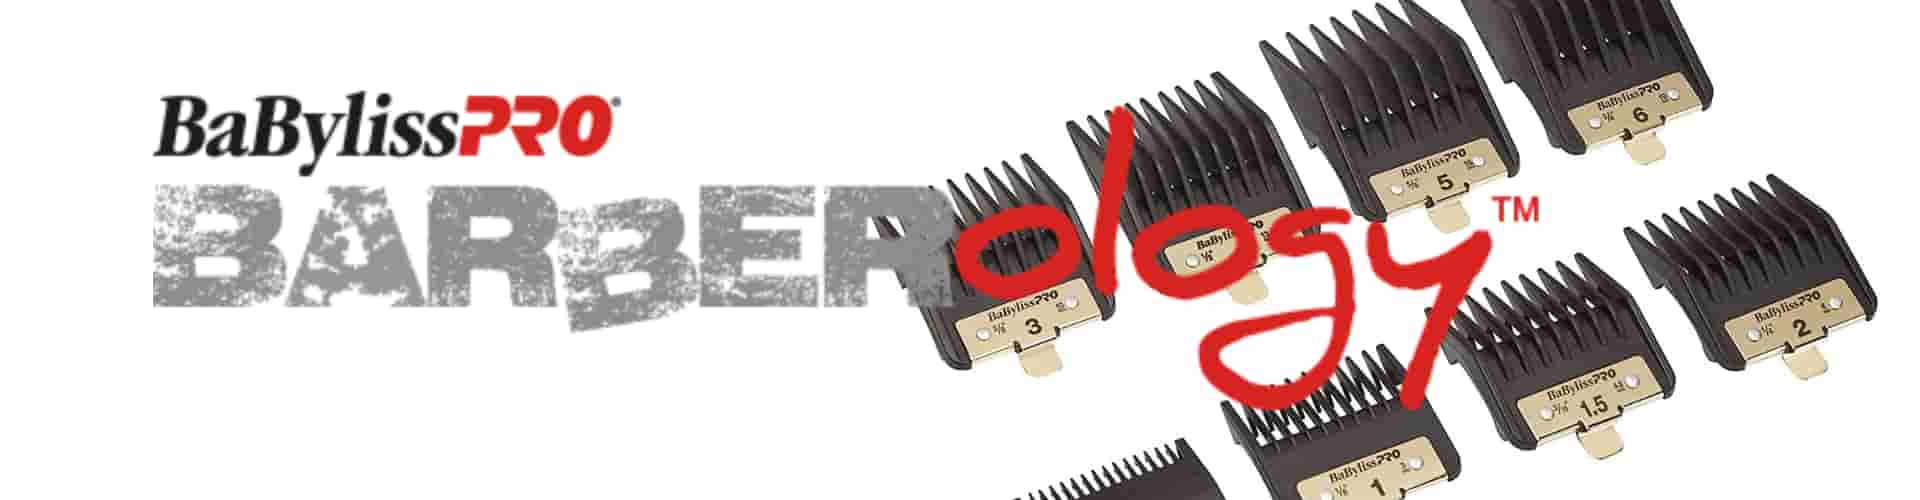 "Stylish BaBylissPRO® Red Comb Set, offering precision and compatibility with 811 models, FX668, and FX671."